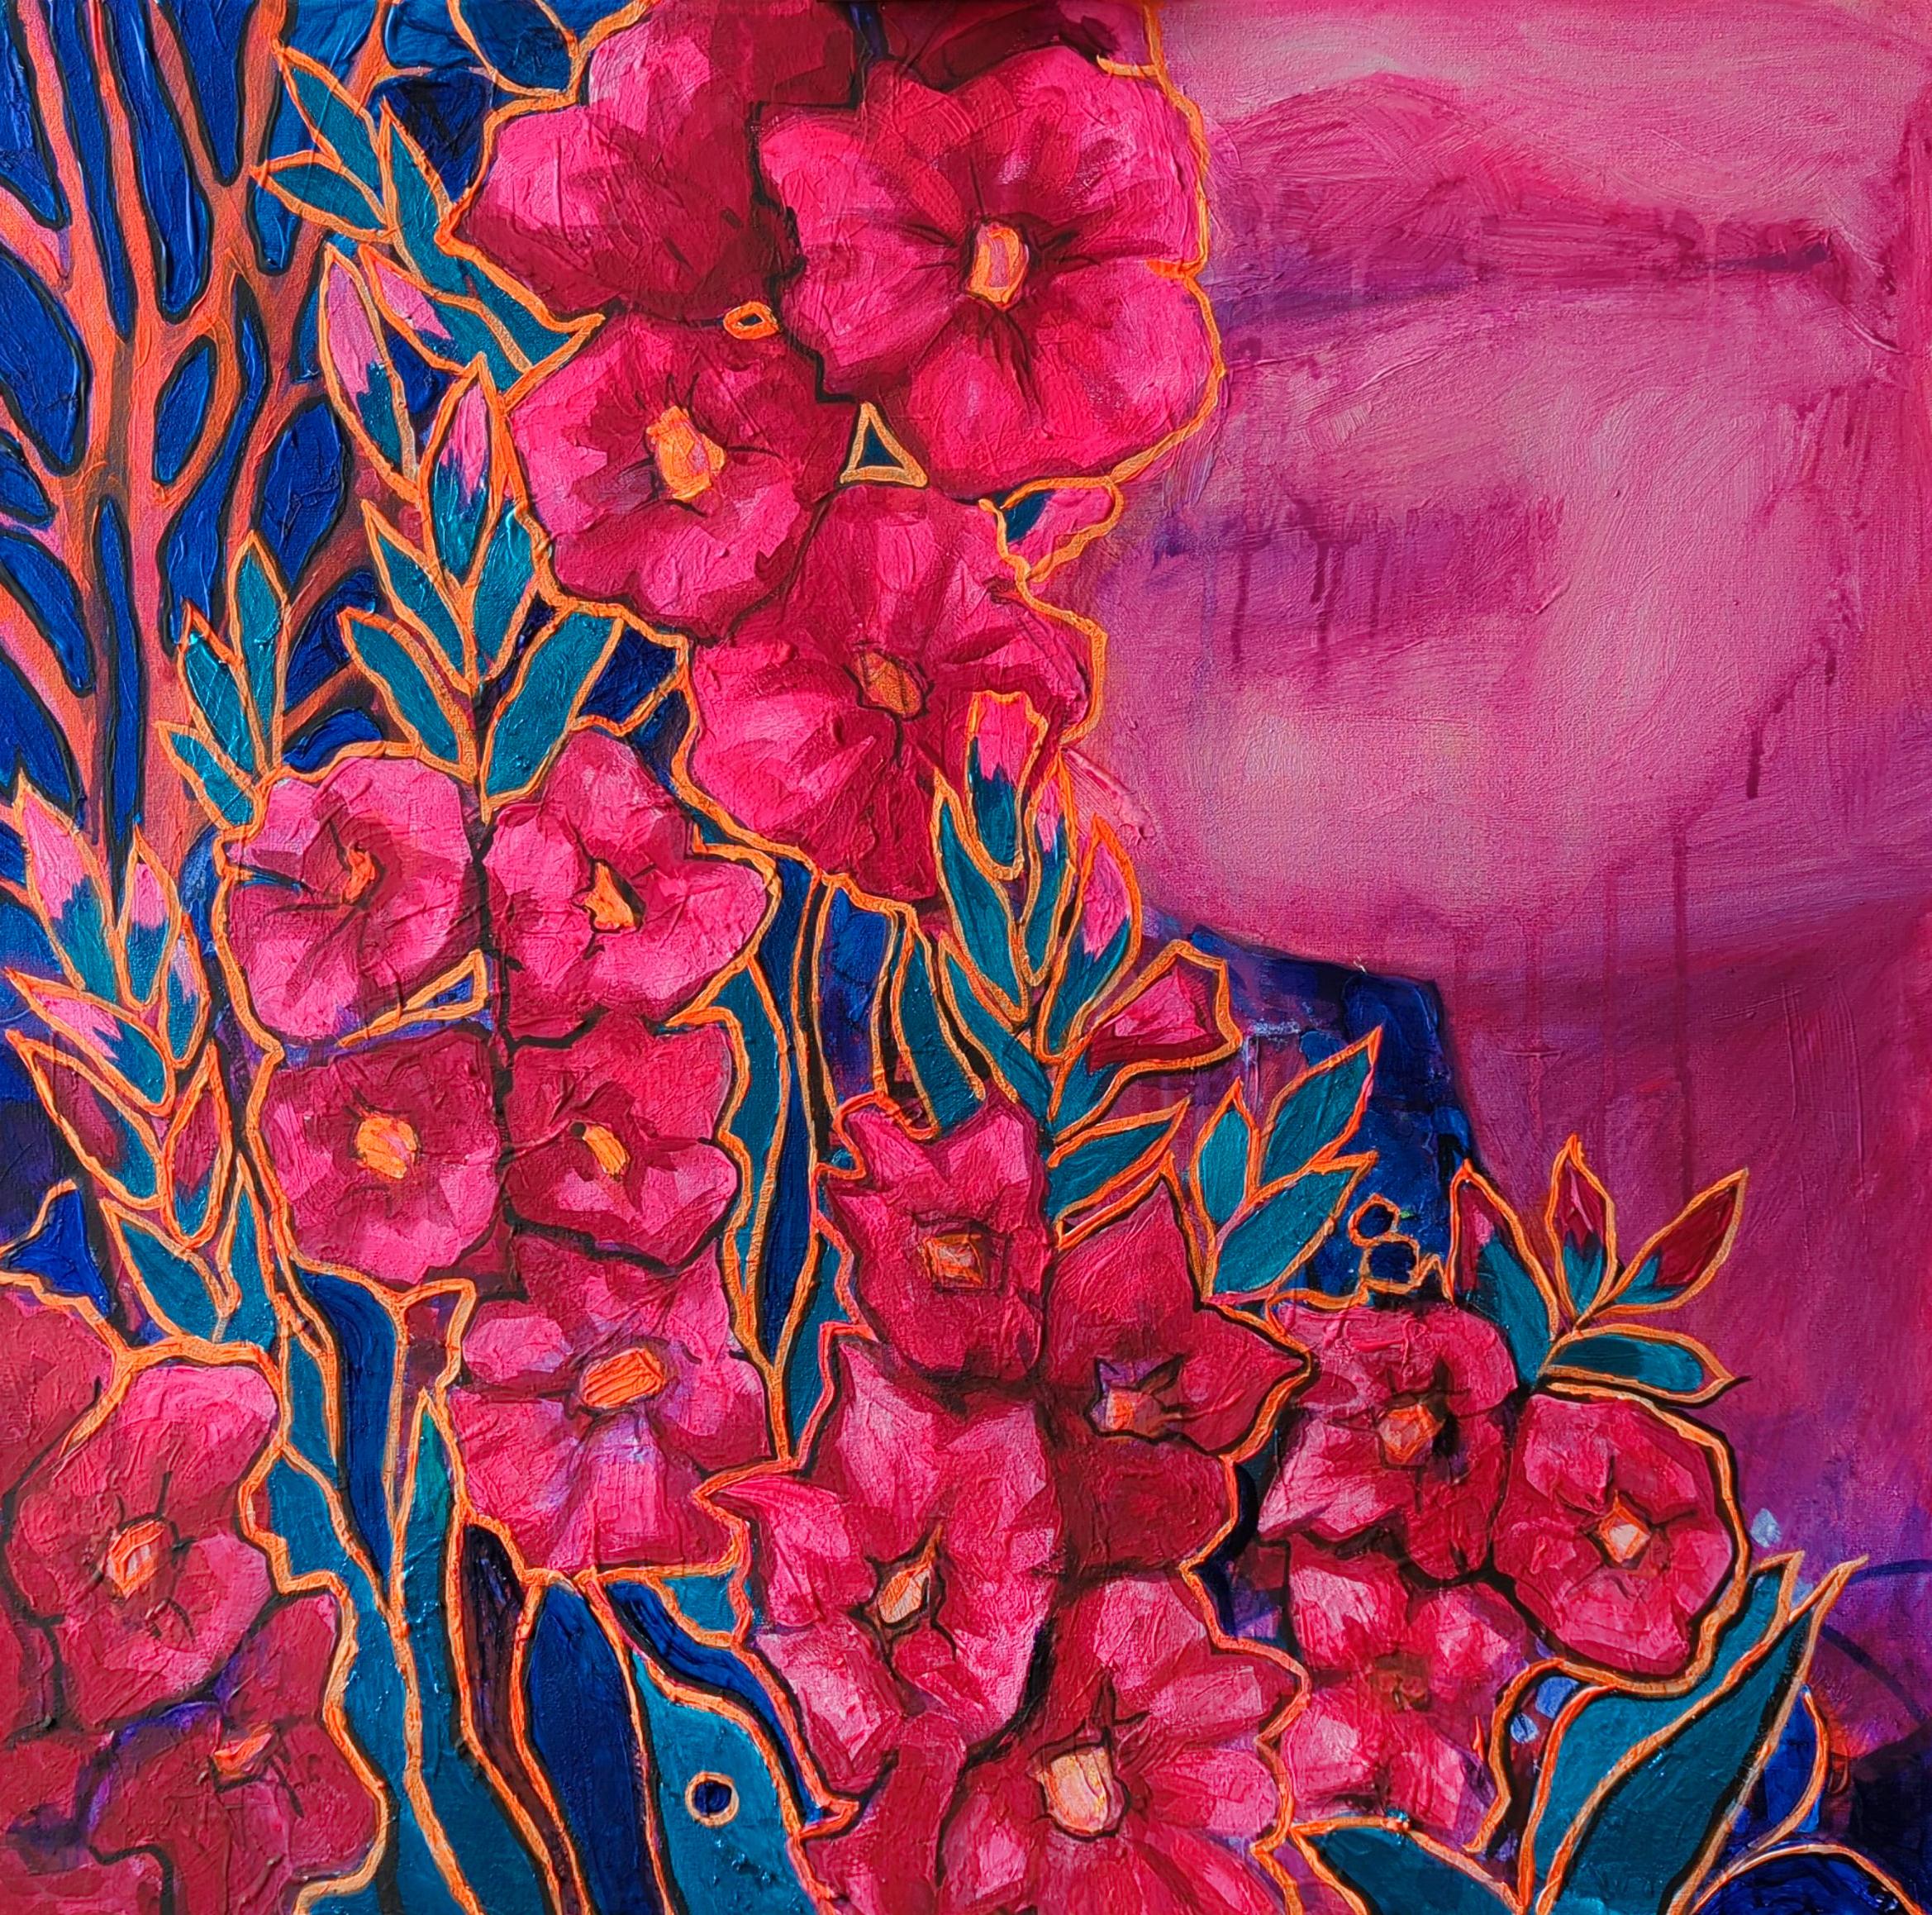 ITEM DETAILS

The edges are painted
Some parts of the picture glow under blue light

ABOUT THE ARTWORK

“Joyful Calm" is a painting dedicated to the inner harmony that can be
found in everyday life. The gladiolus flowers symbolize the optimism
and